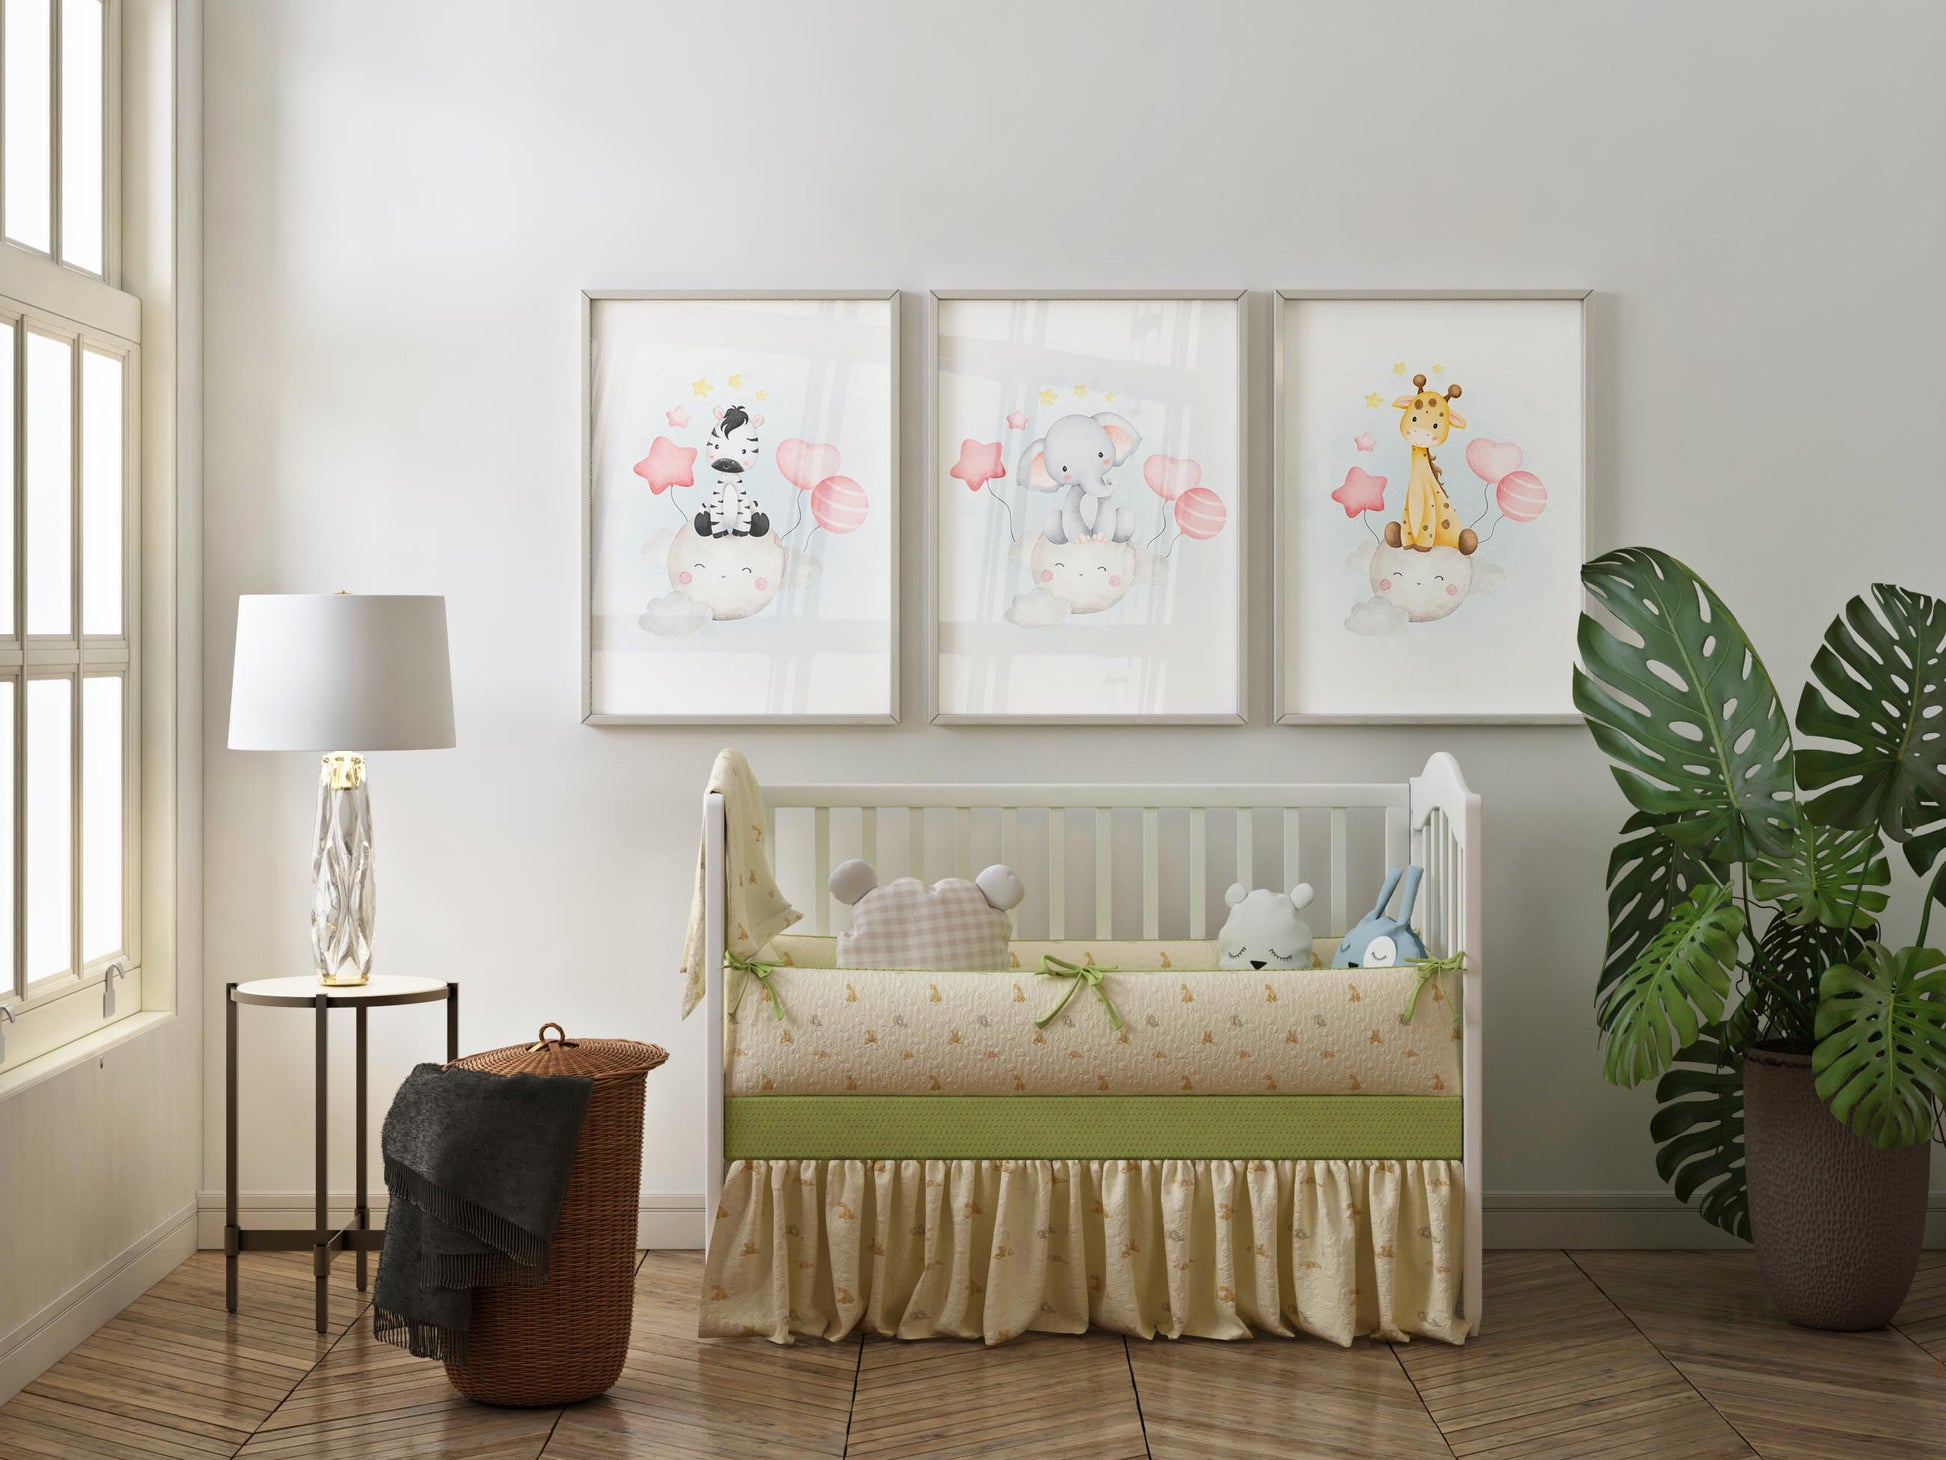 Set of 3 Personalized Animal Decor Prints in Framed Canvas.